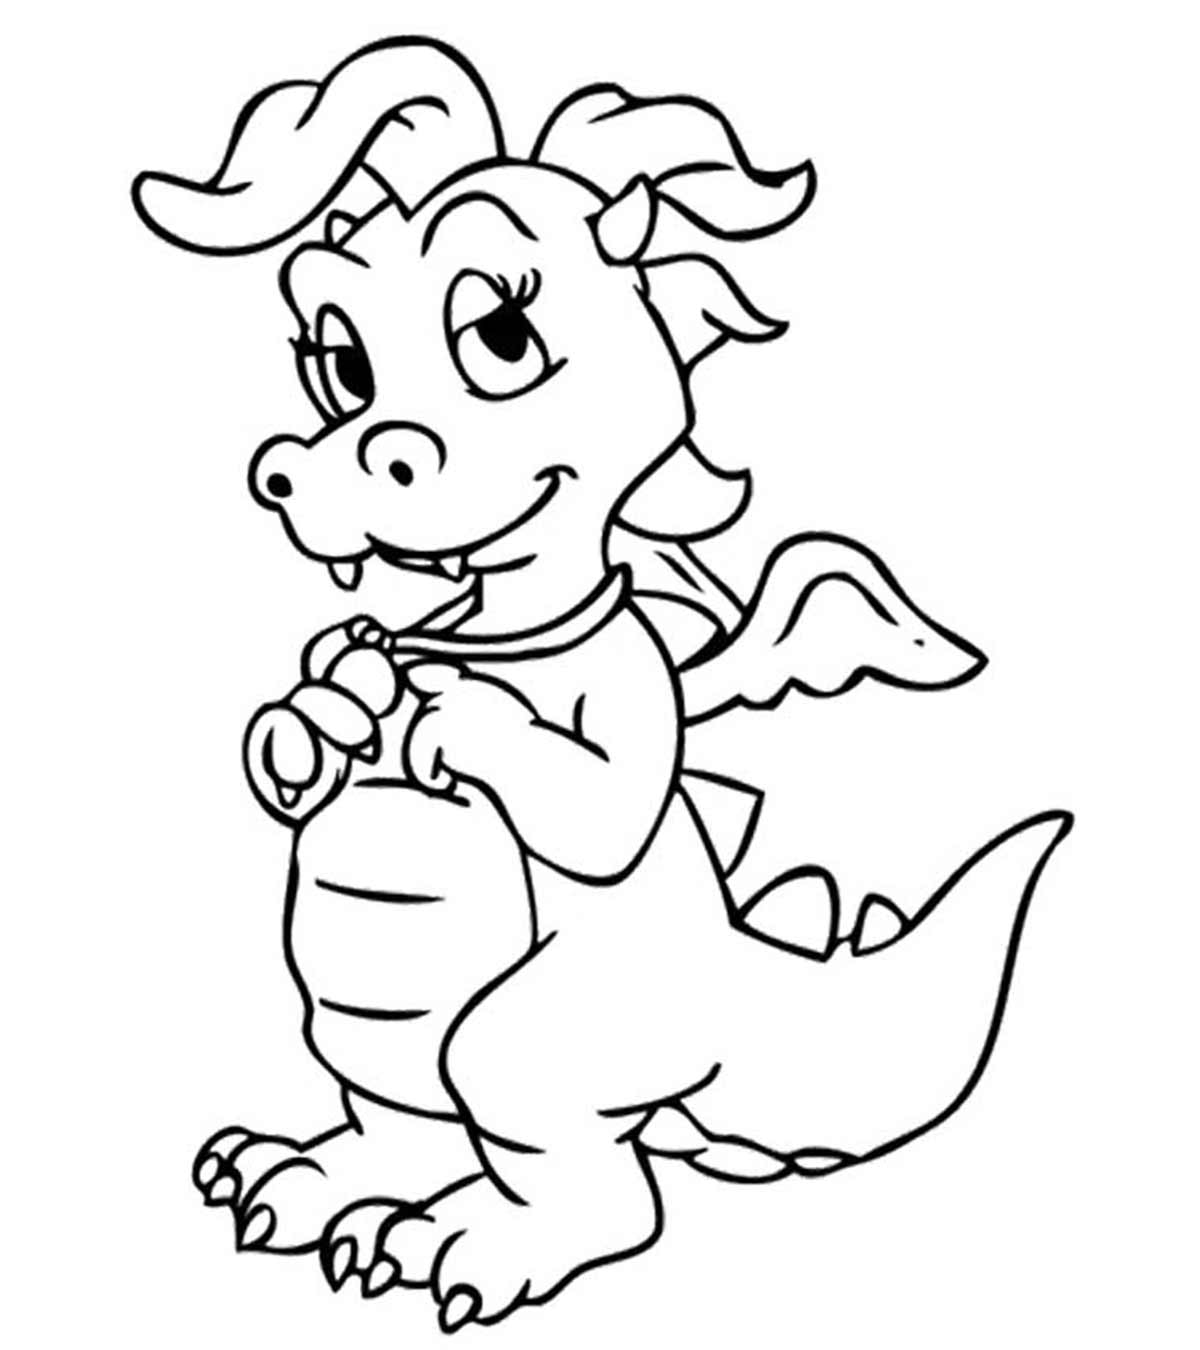 Top 25 Dragon Tales Coloring Pages Your Toddler Will Love_image